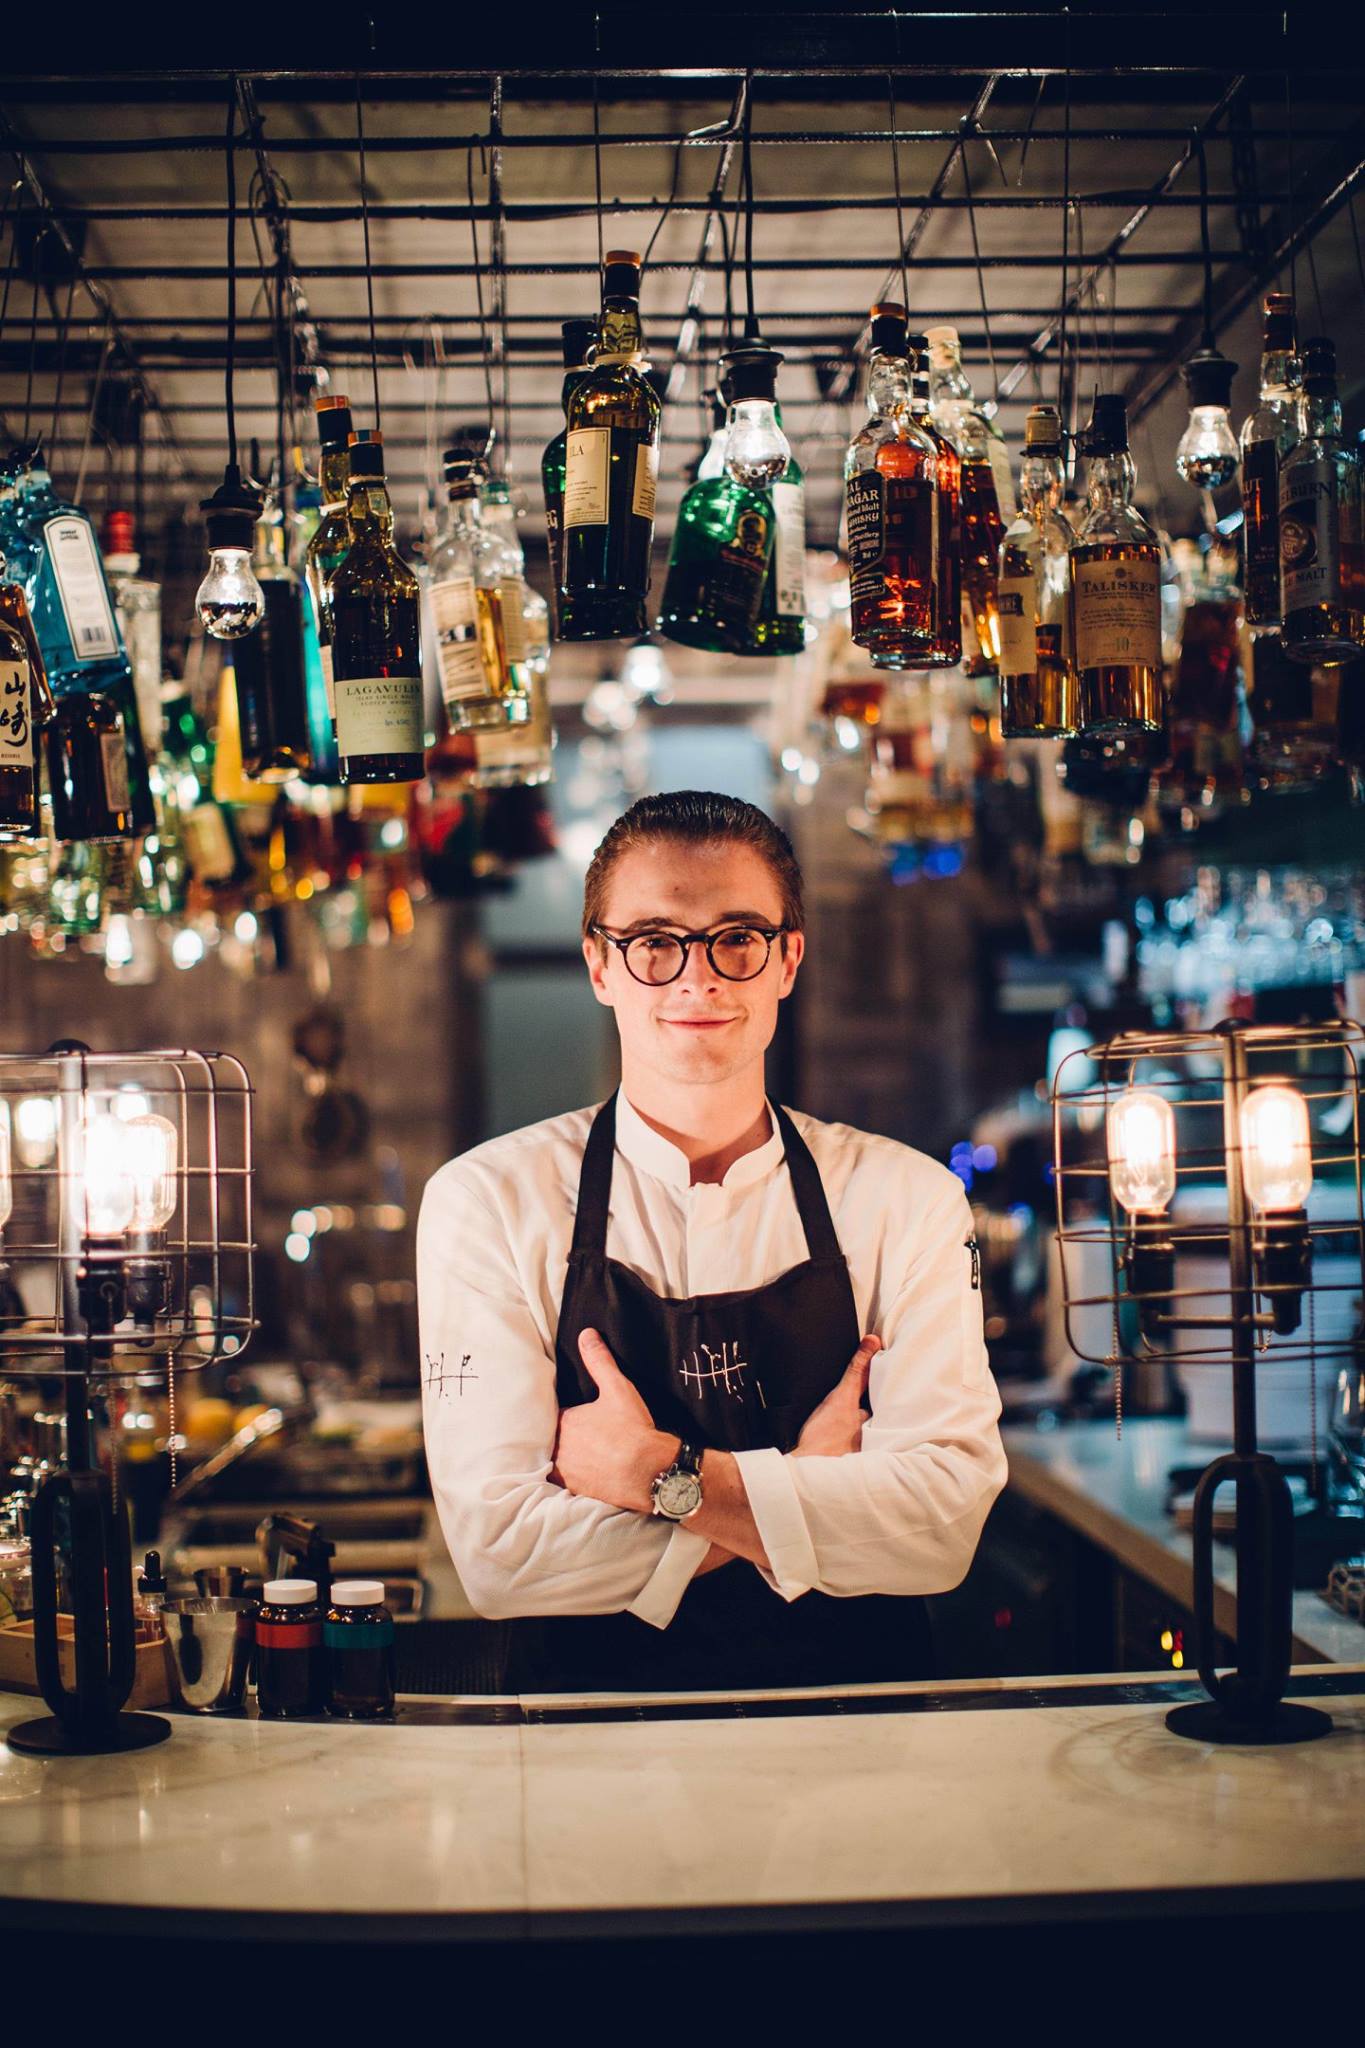 Joe Schofield – The Winner In The Tales of the Cocktail’s Spirited Awards 2018: International Bartender of the Year category